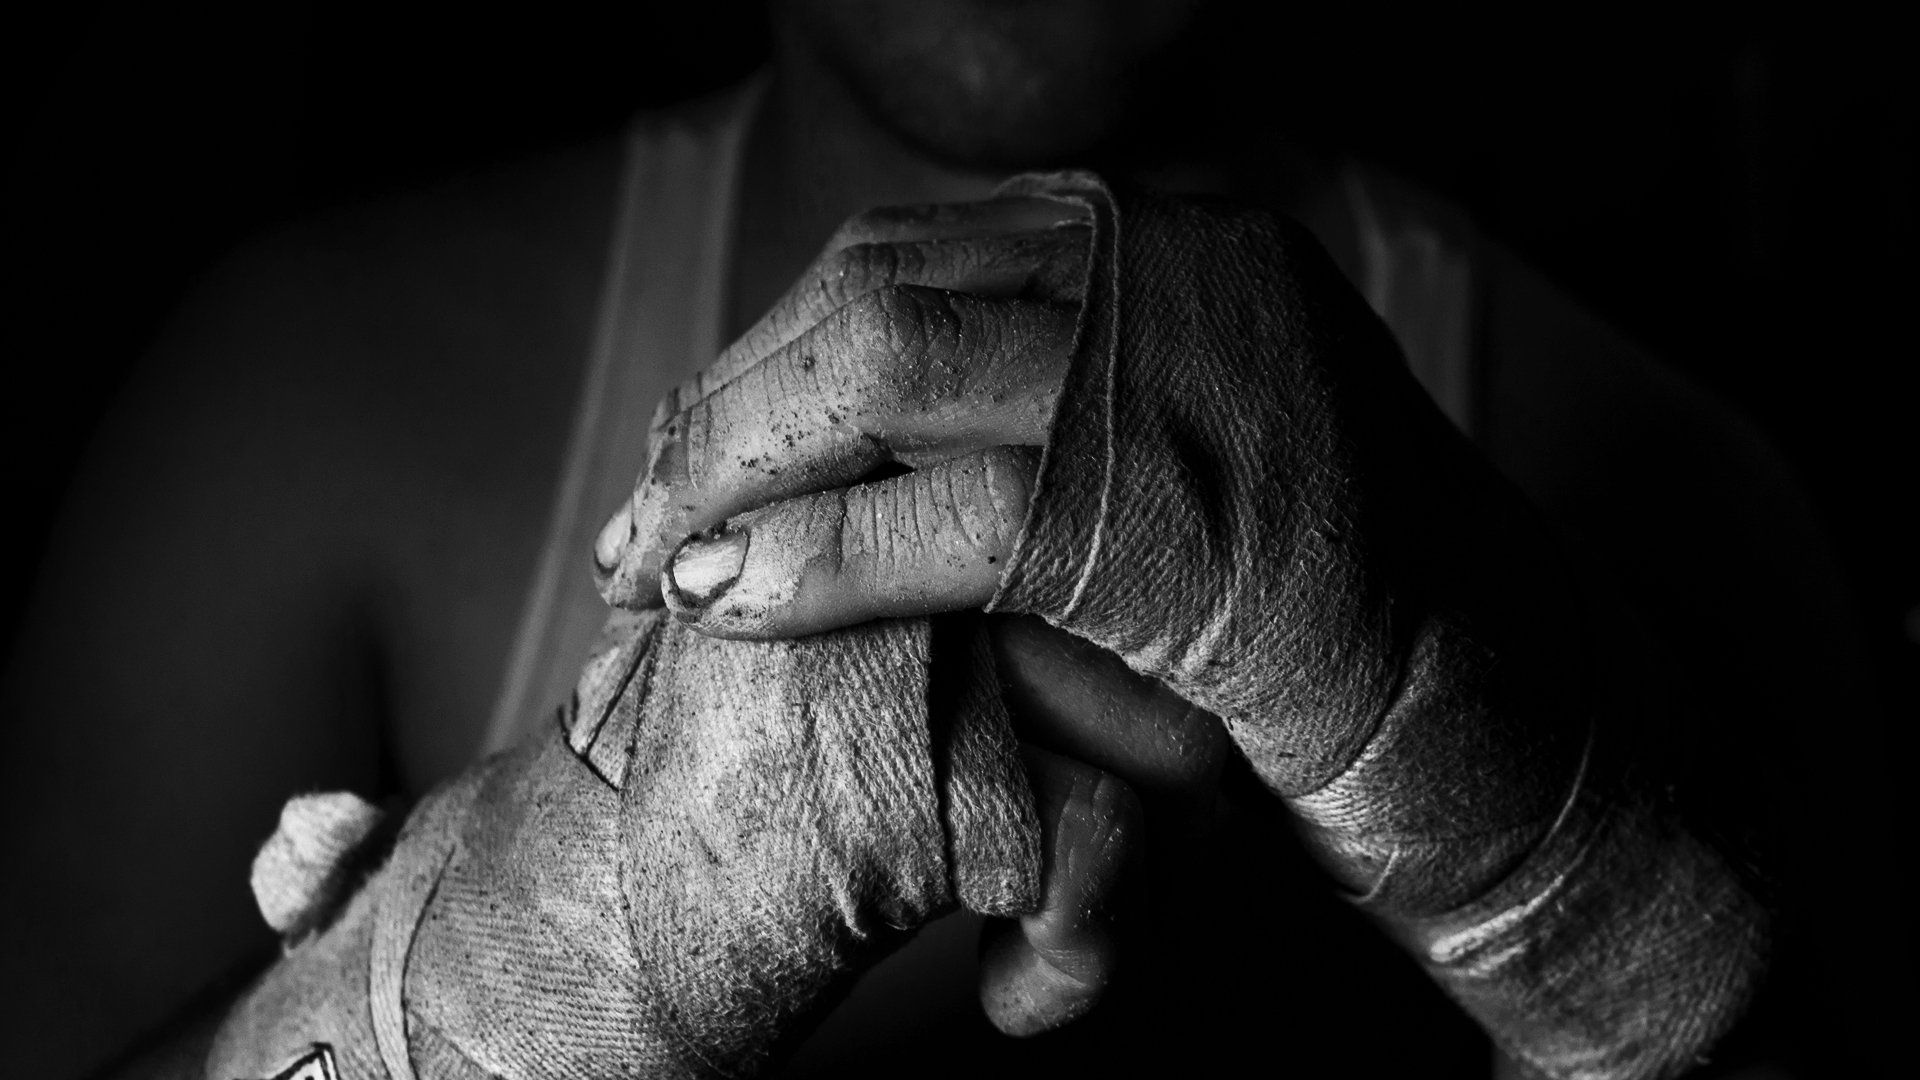 fighting mma extreme people hands blood black and white bw wallpaper